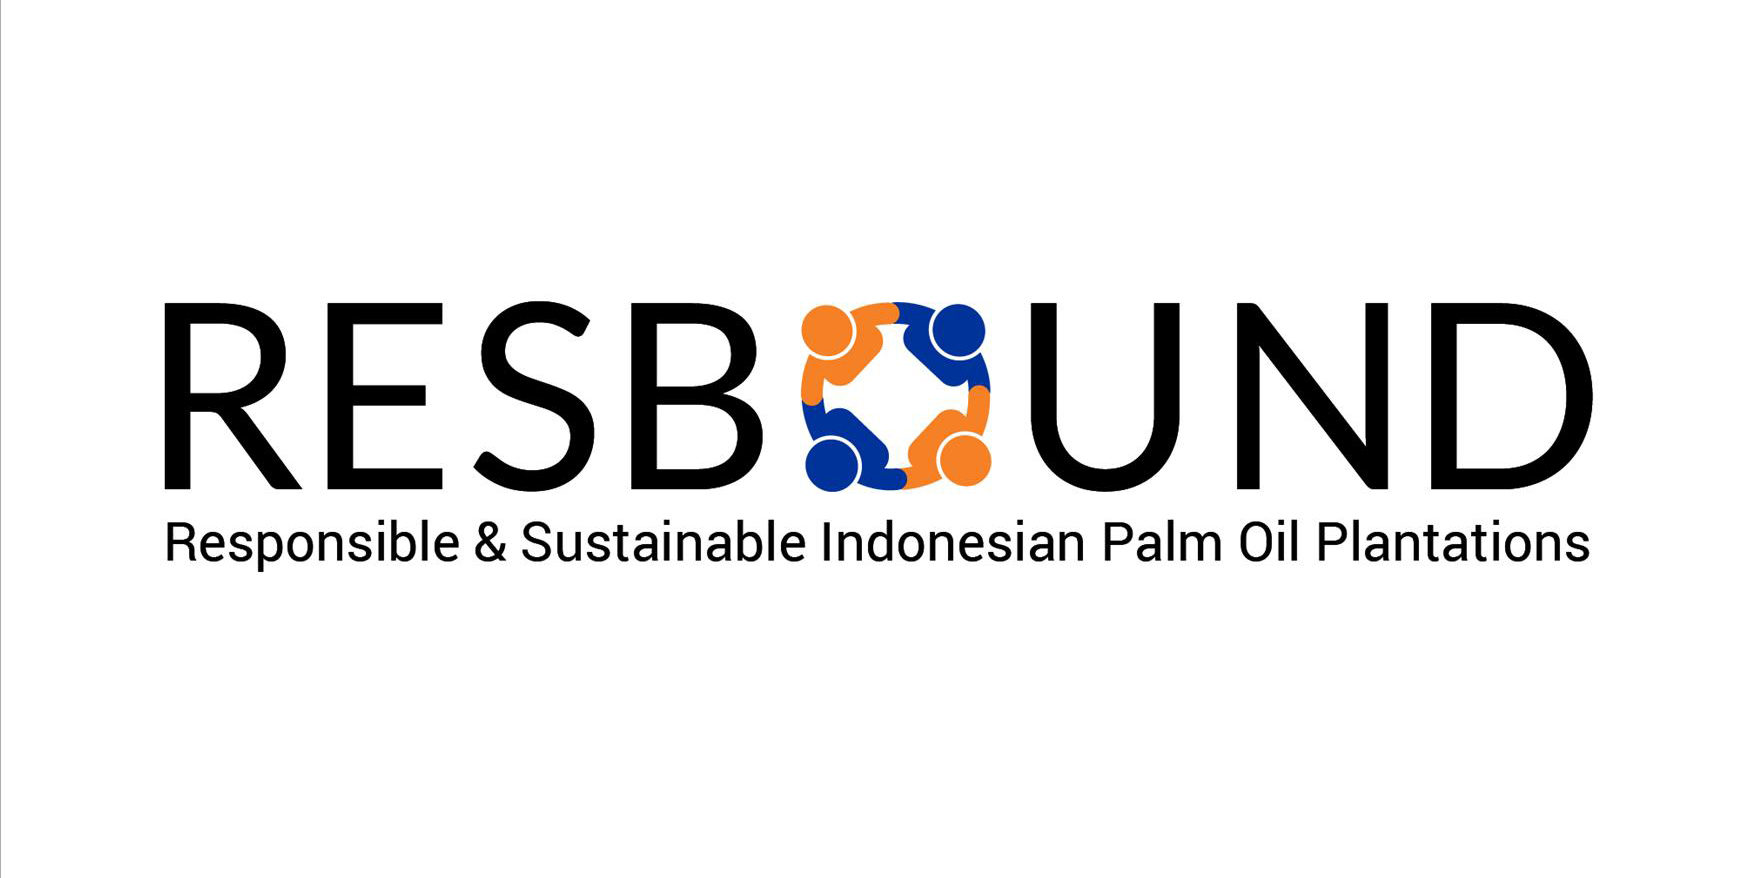 Choose Products Responsibly: Another side of Palm Oil Industry